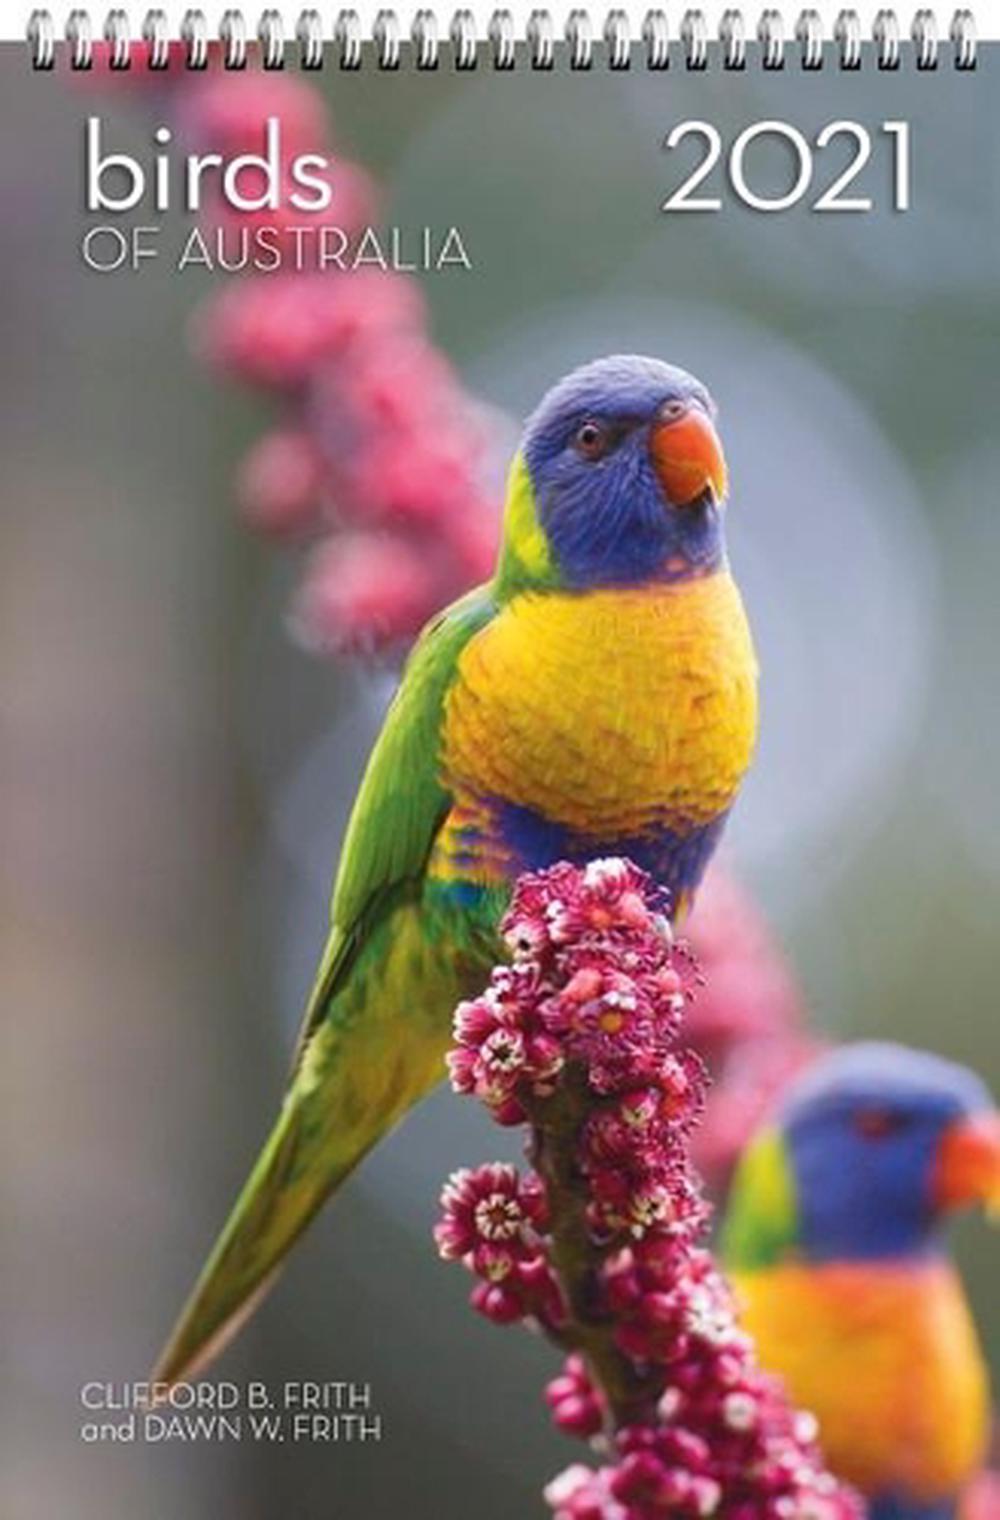 2021 Birds of Australia Wall Calendar by Cliff Frith and Dawn Frith